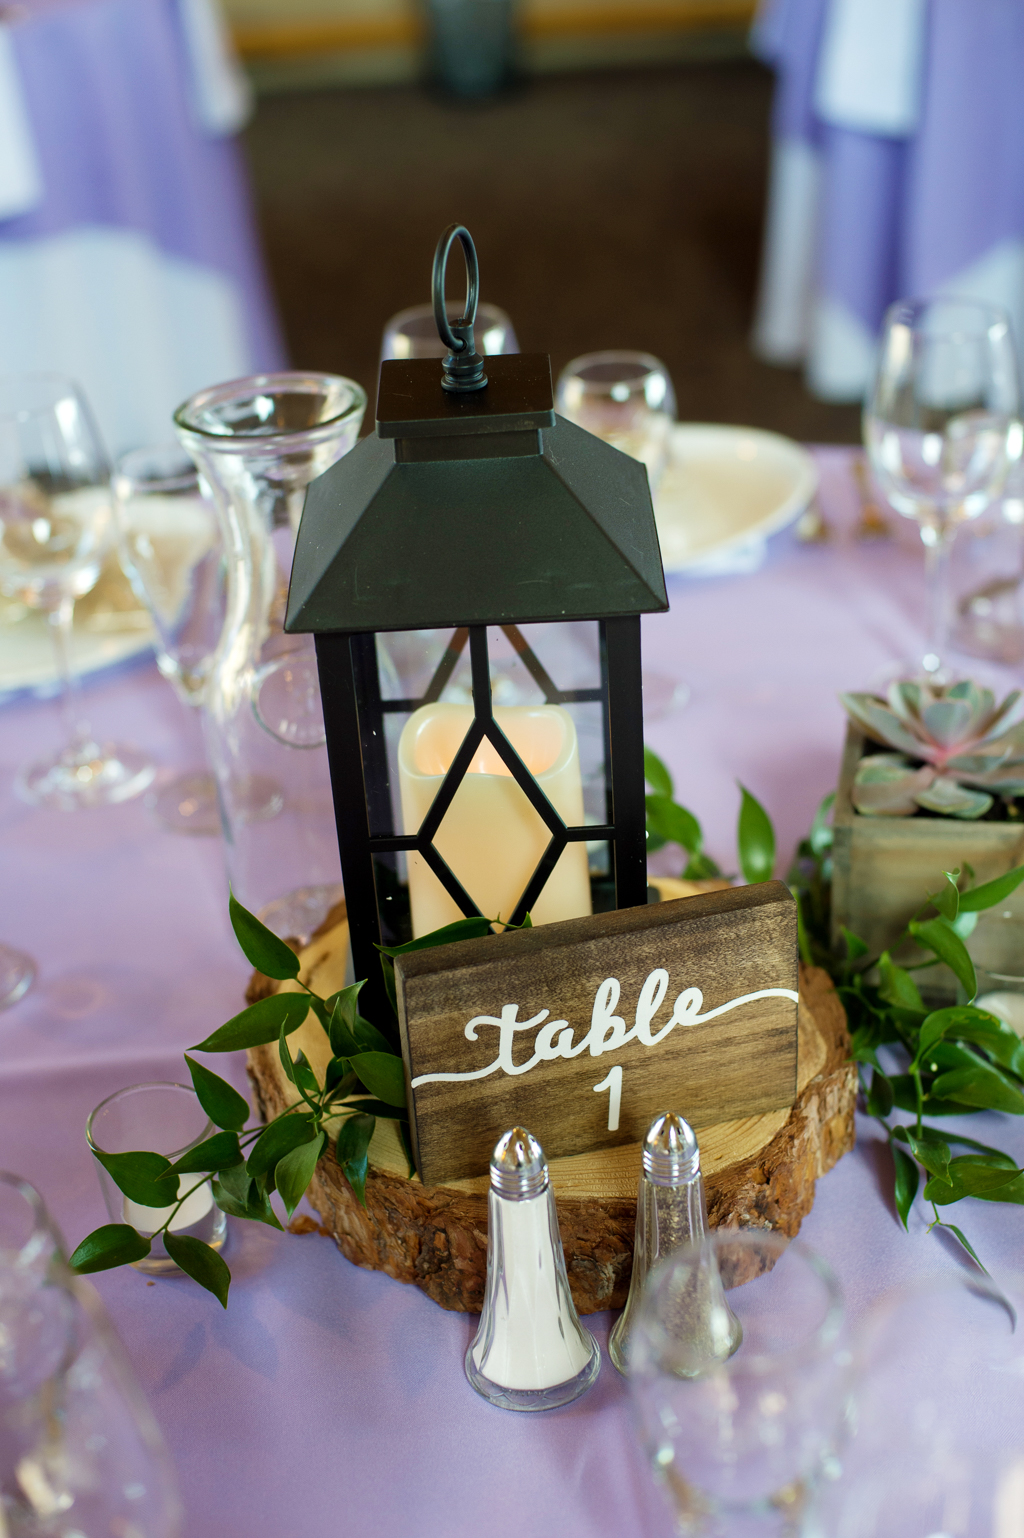 a lantern with a candle and a sign for table 1 at a wedding